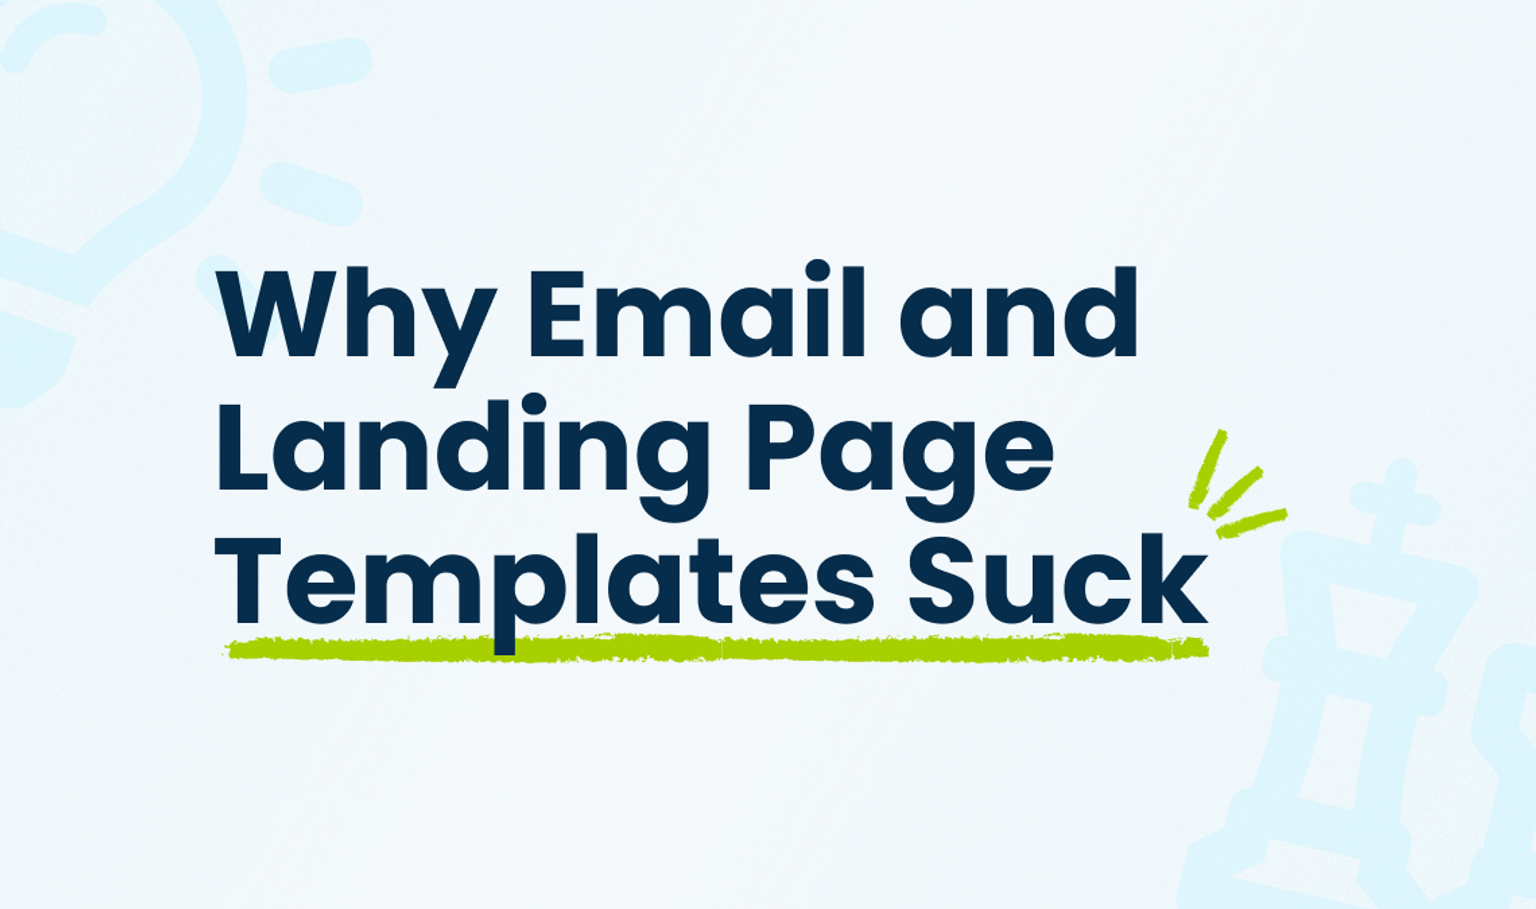 Why Email and Landing Page Templates Suck